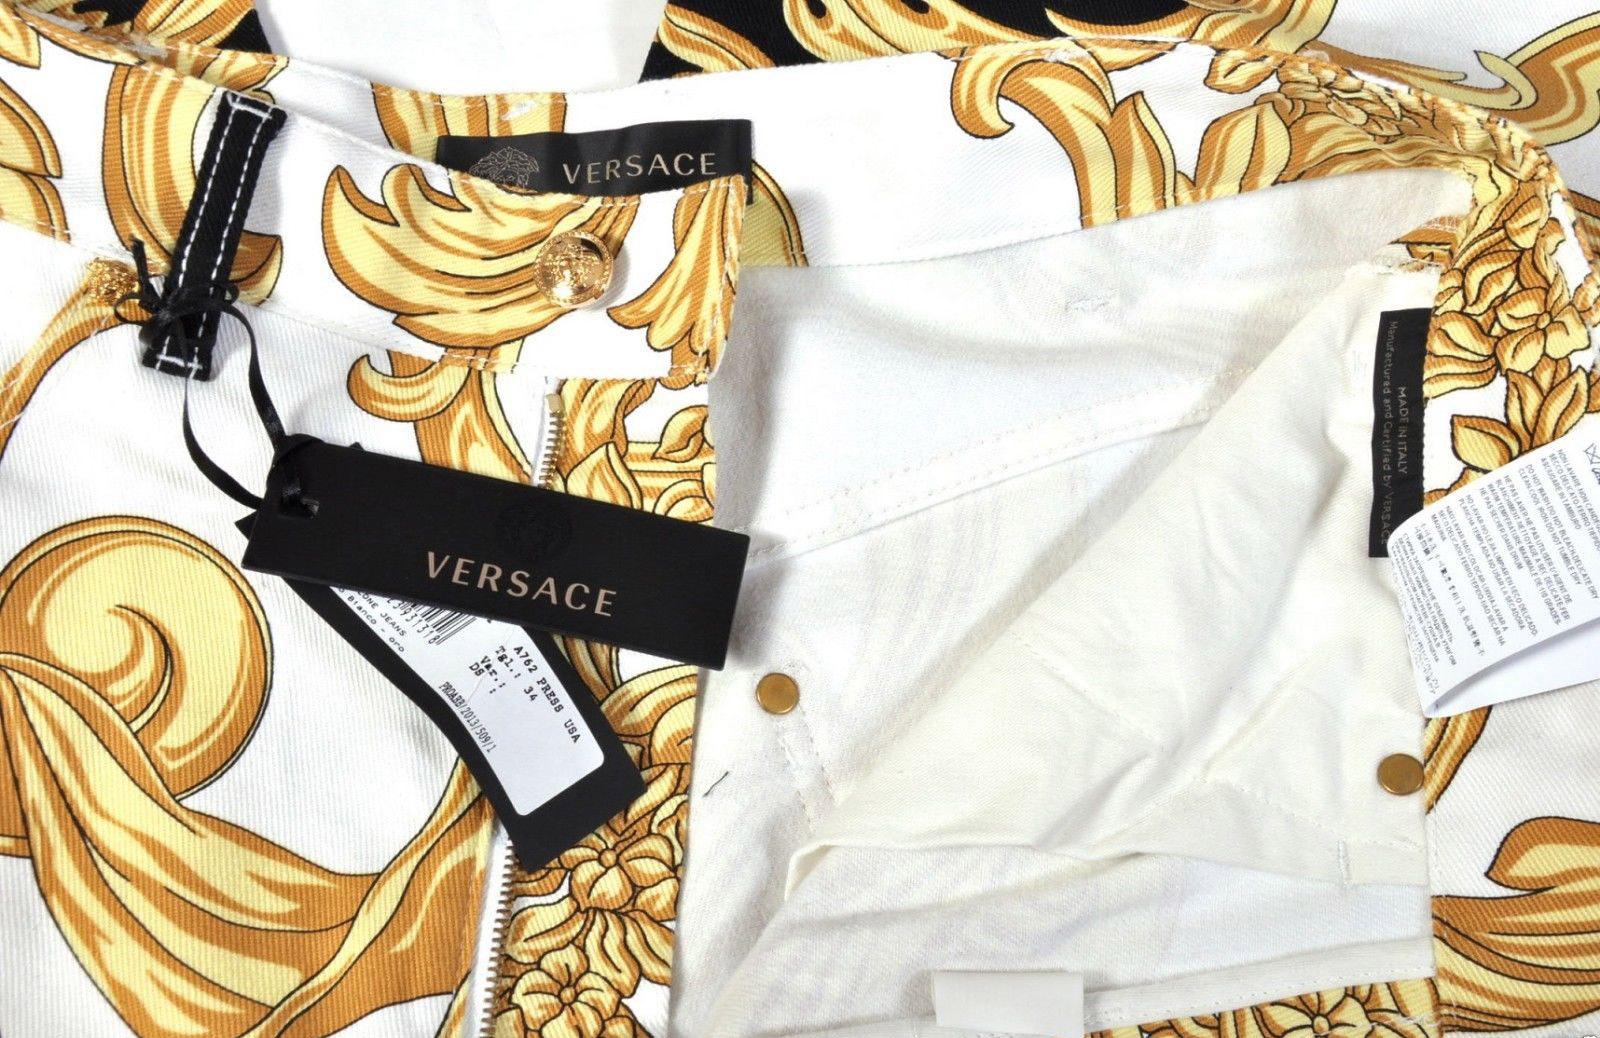 NEW VERSACE BAROCCO PRINTED JEANS for MEN size 32